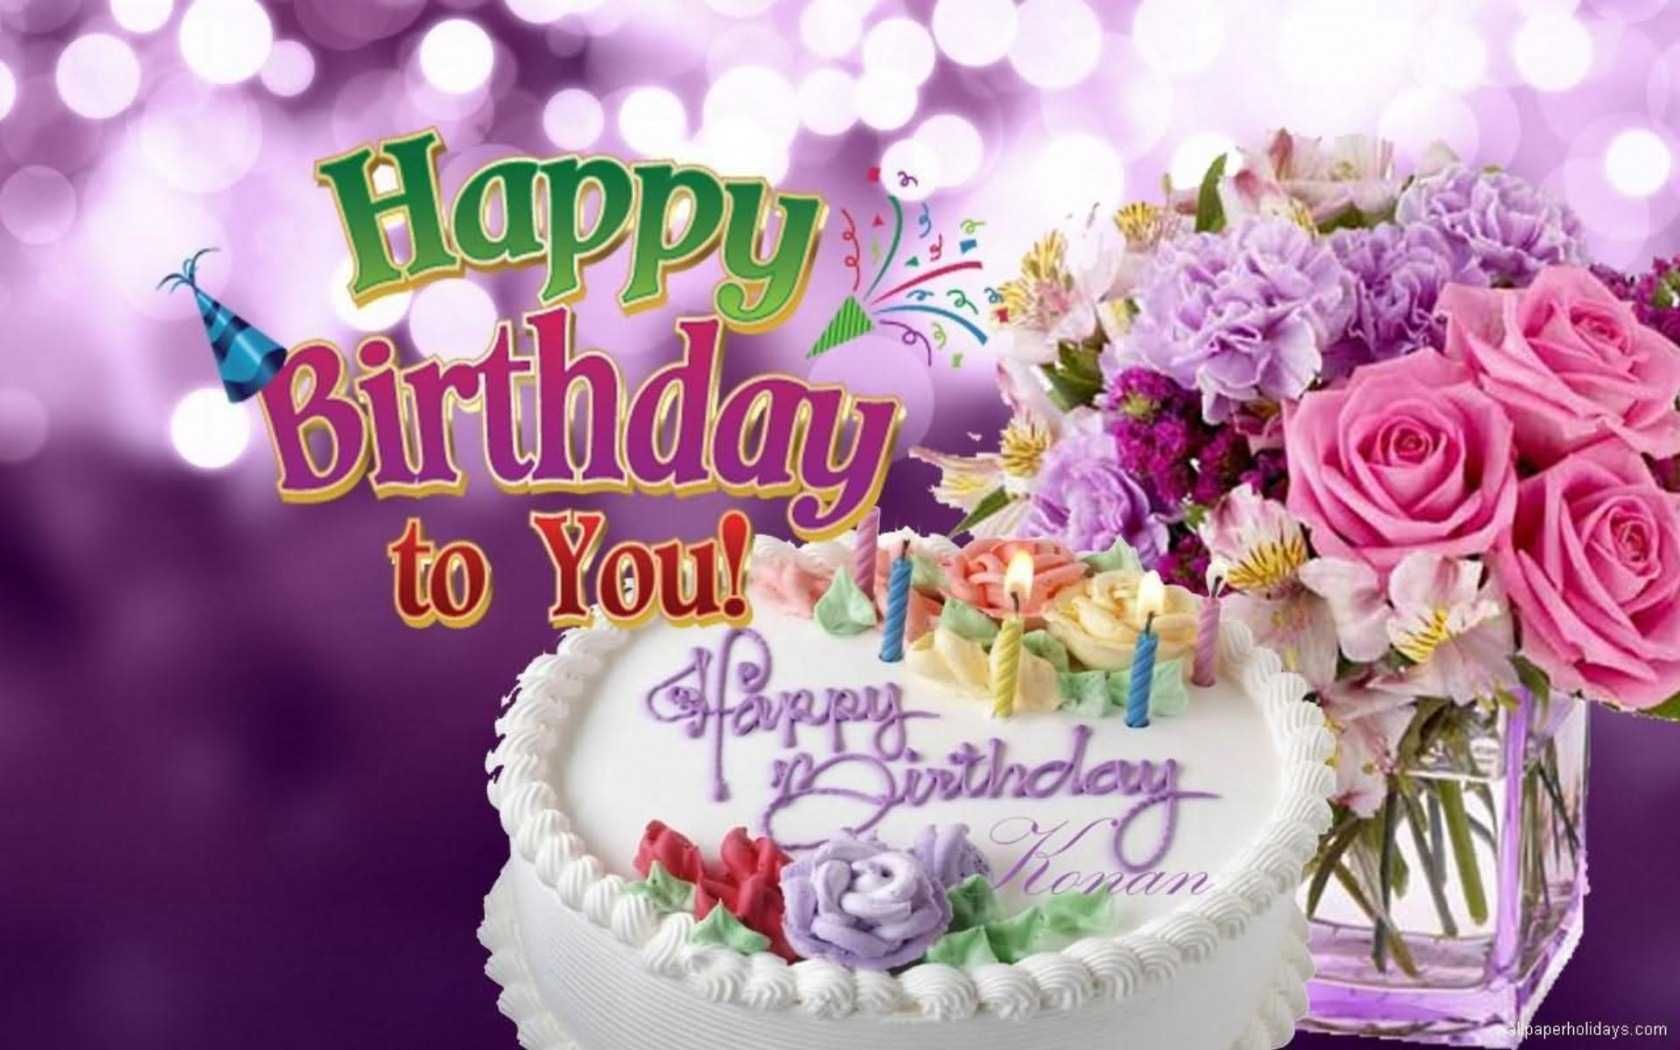 Happy Birthday To You - HD Wallpaper 